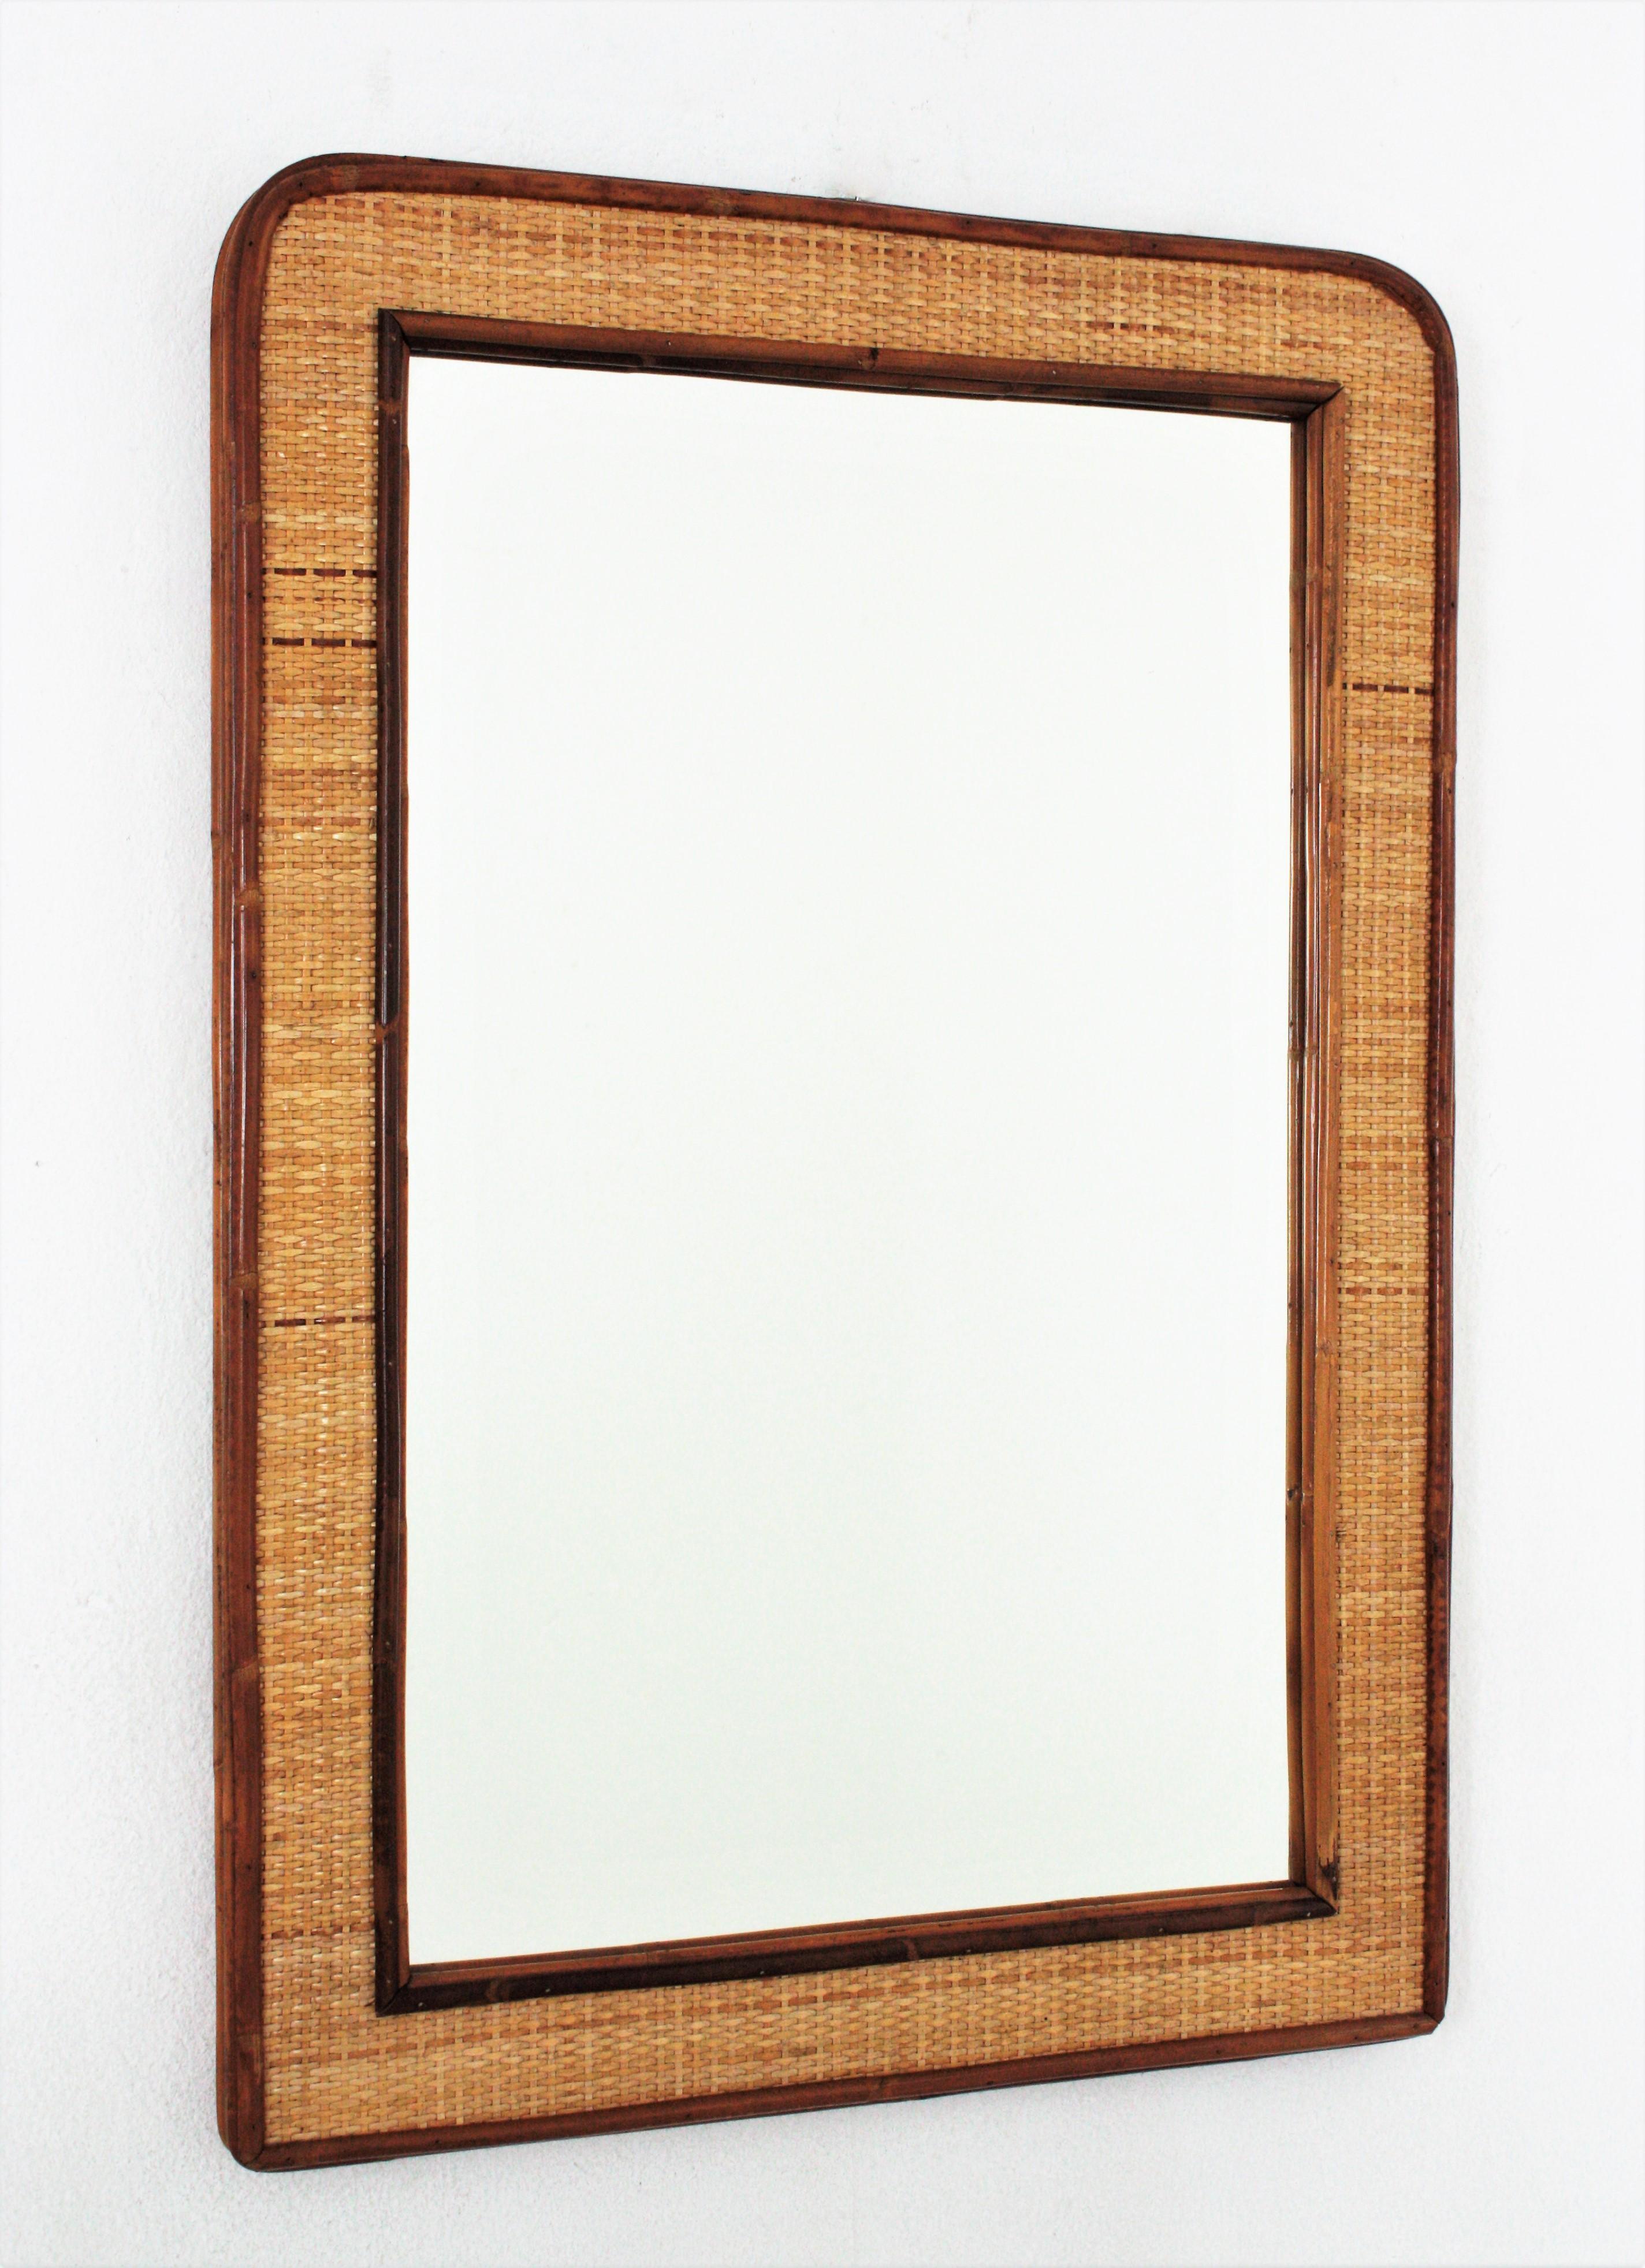 Large Rectangular Mirror in Rattan and Wicker, Italy, 1970s
Elegant mid-20th century period woven wicker and bamboo mirror.
This rattan / wicker rectangular mirror dates from the 1970s. A four layered dark rattan frame featuring a woven wicker